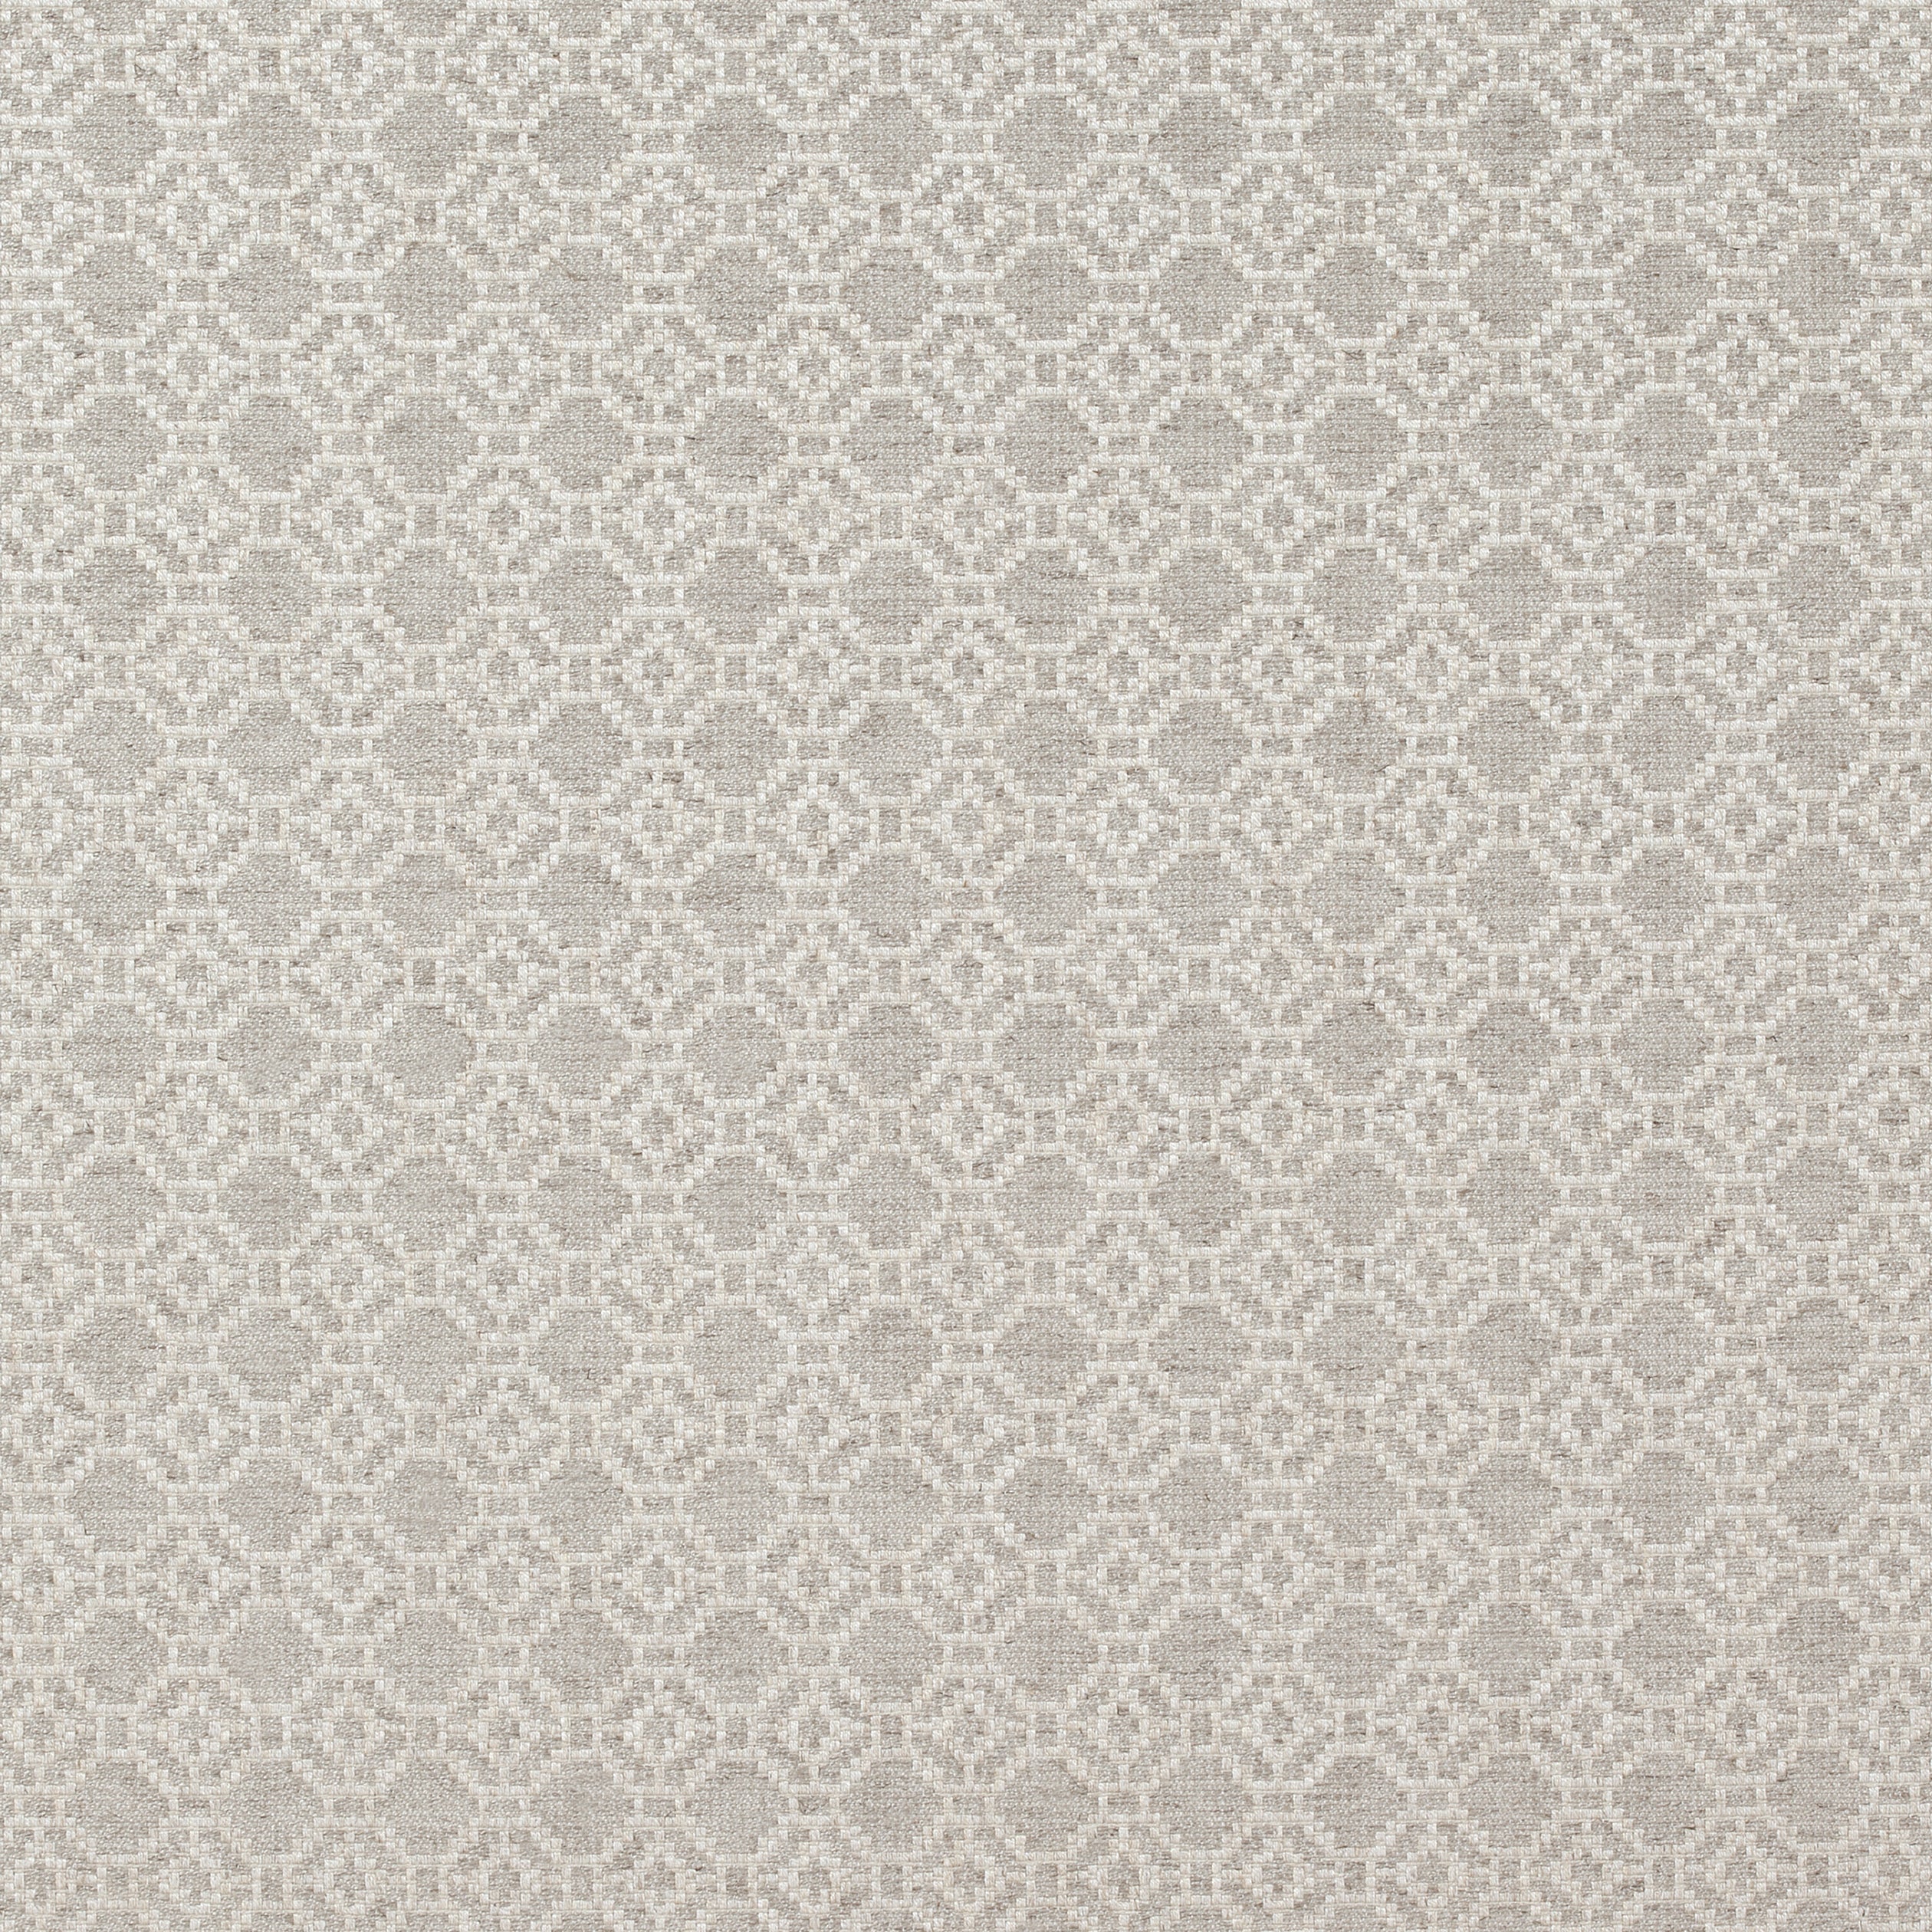 Amalfi fabric in beige color - pattern number AW73040 - by Anna French in the Meridian collection